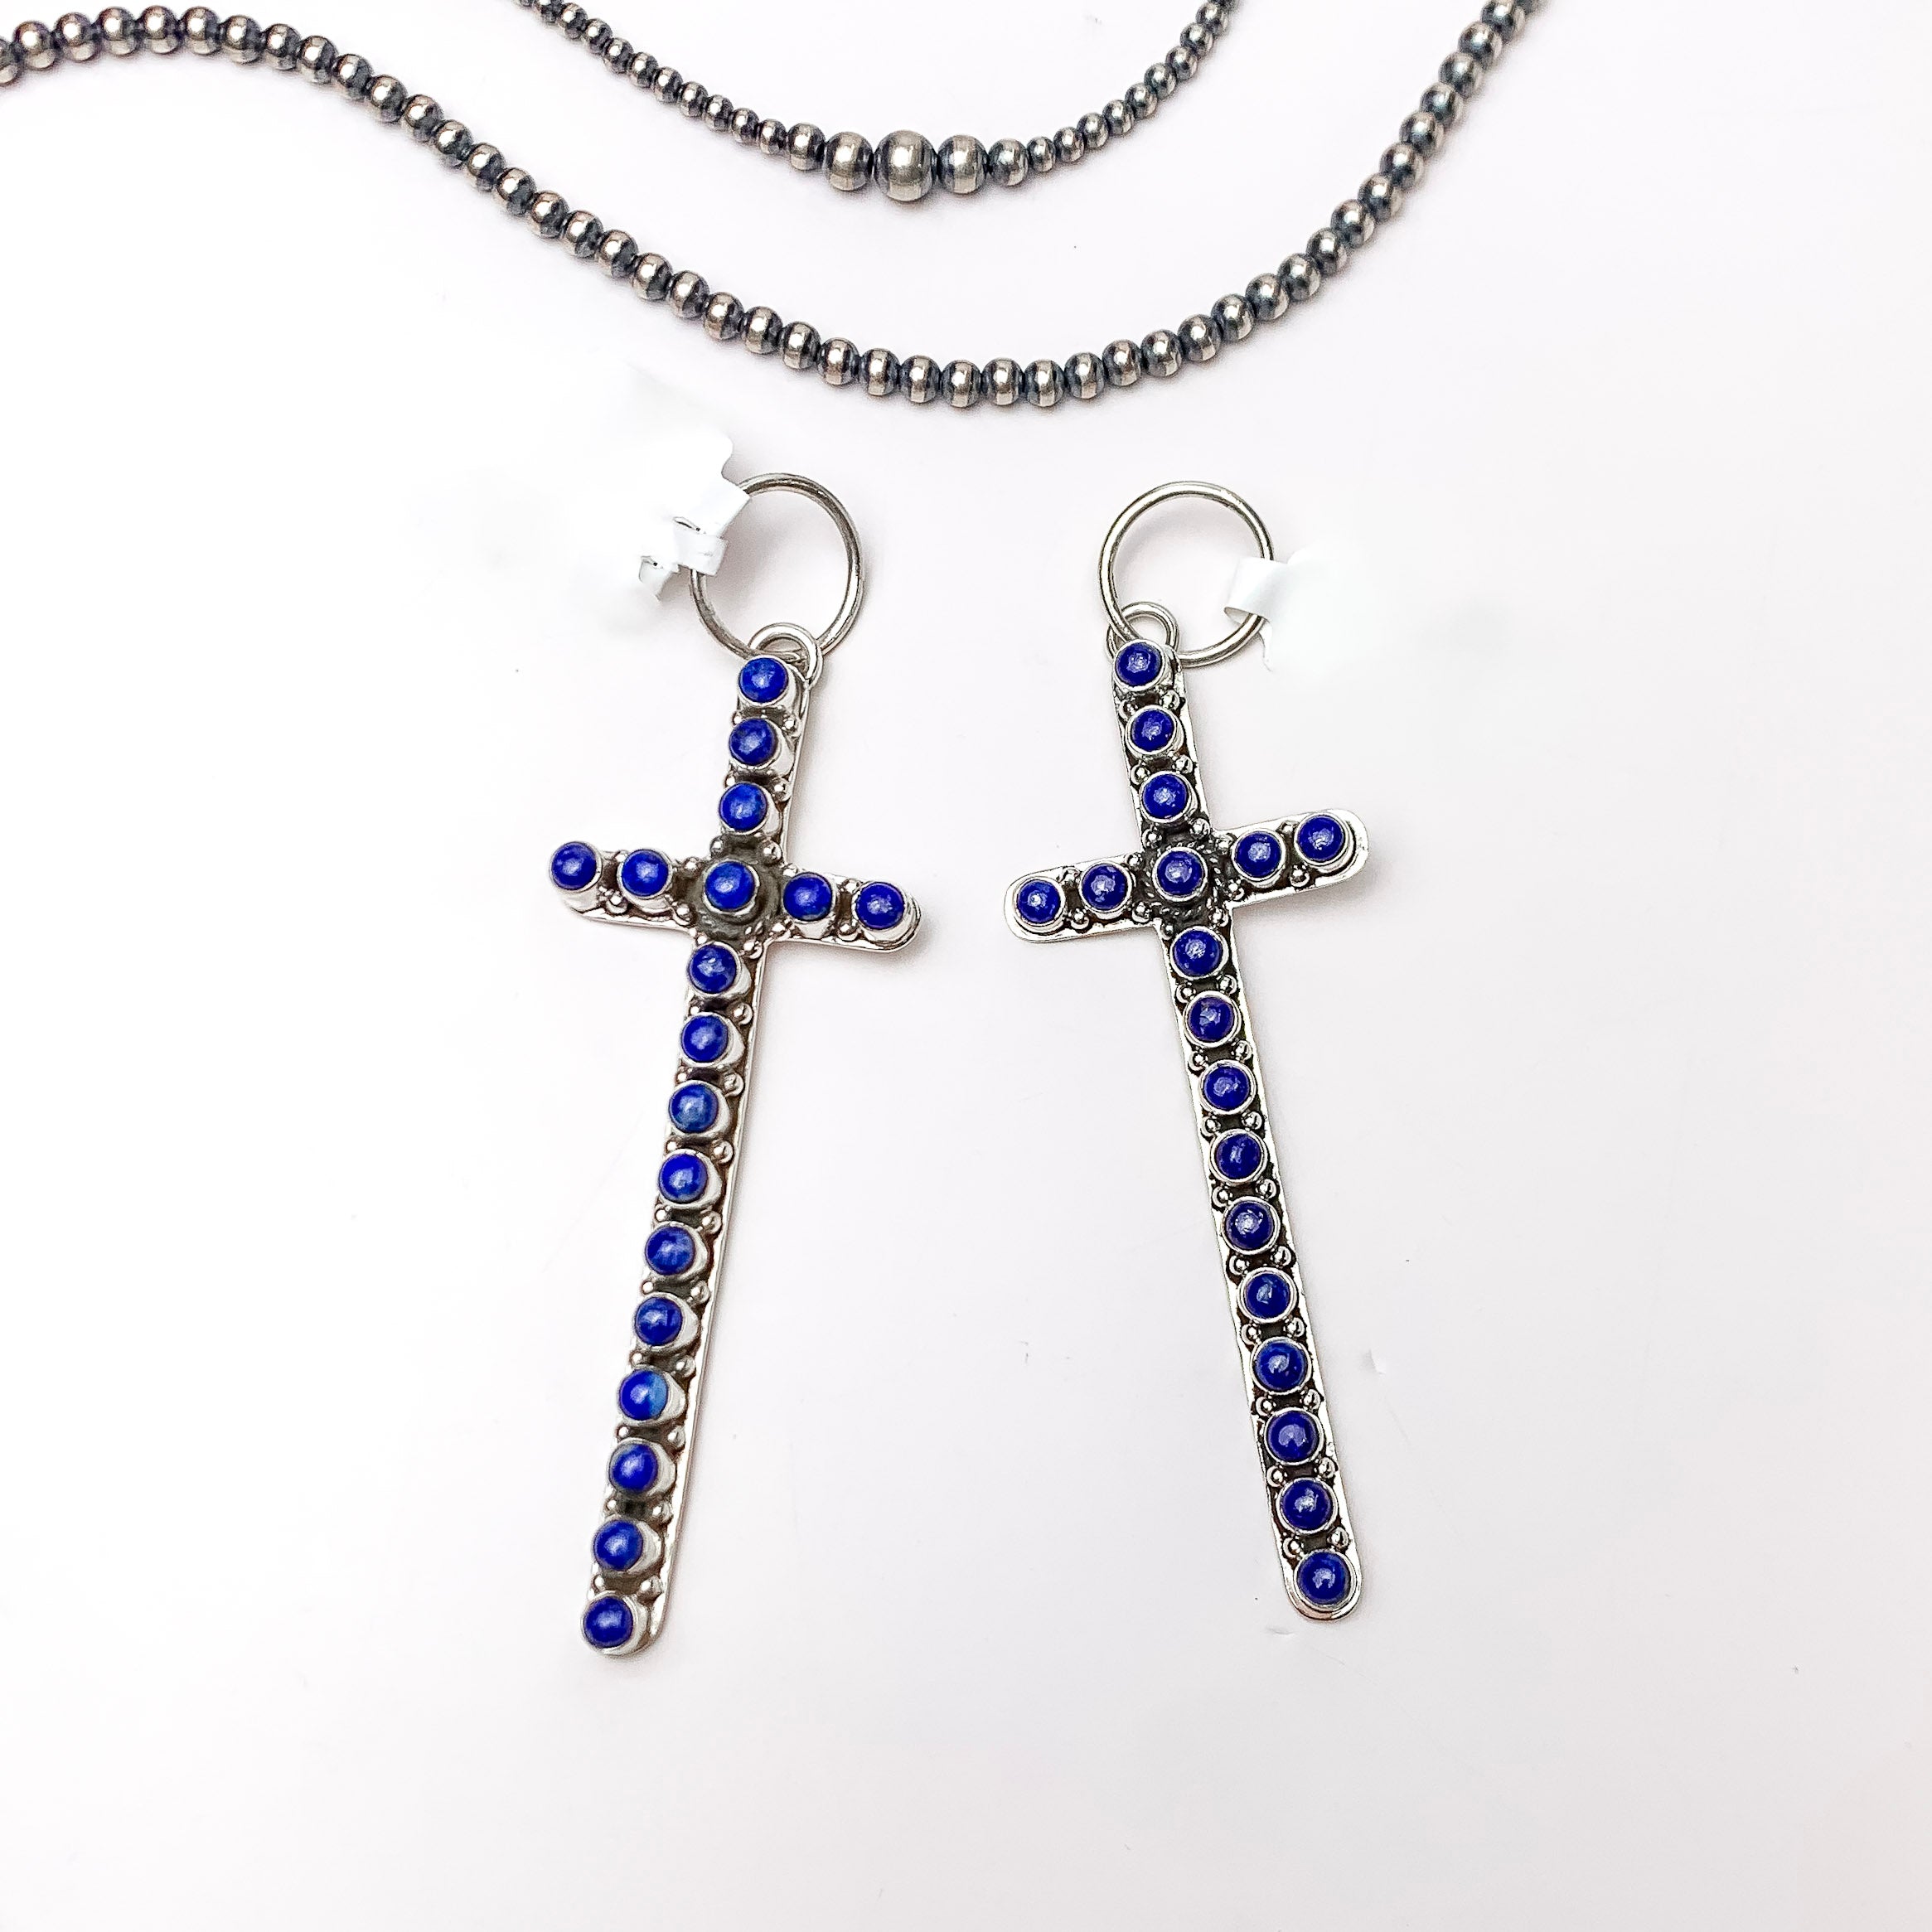 Centered in the picture is a large cross pendant with dark lapis stones. Navajo pearls are laid to the top of the pendant. All on a white background.